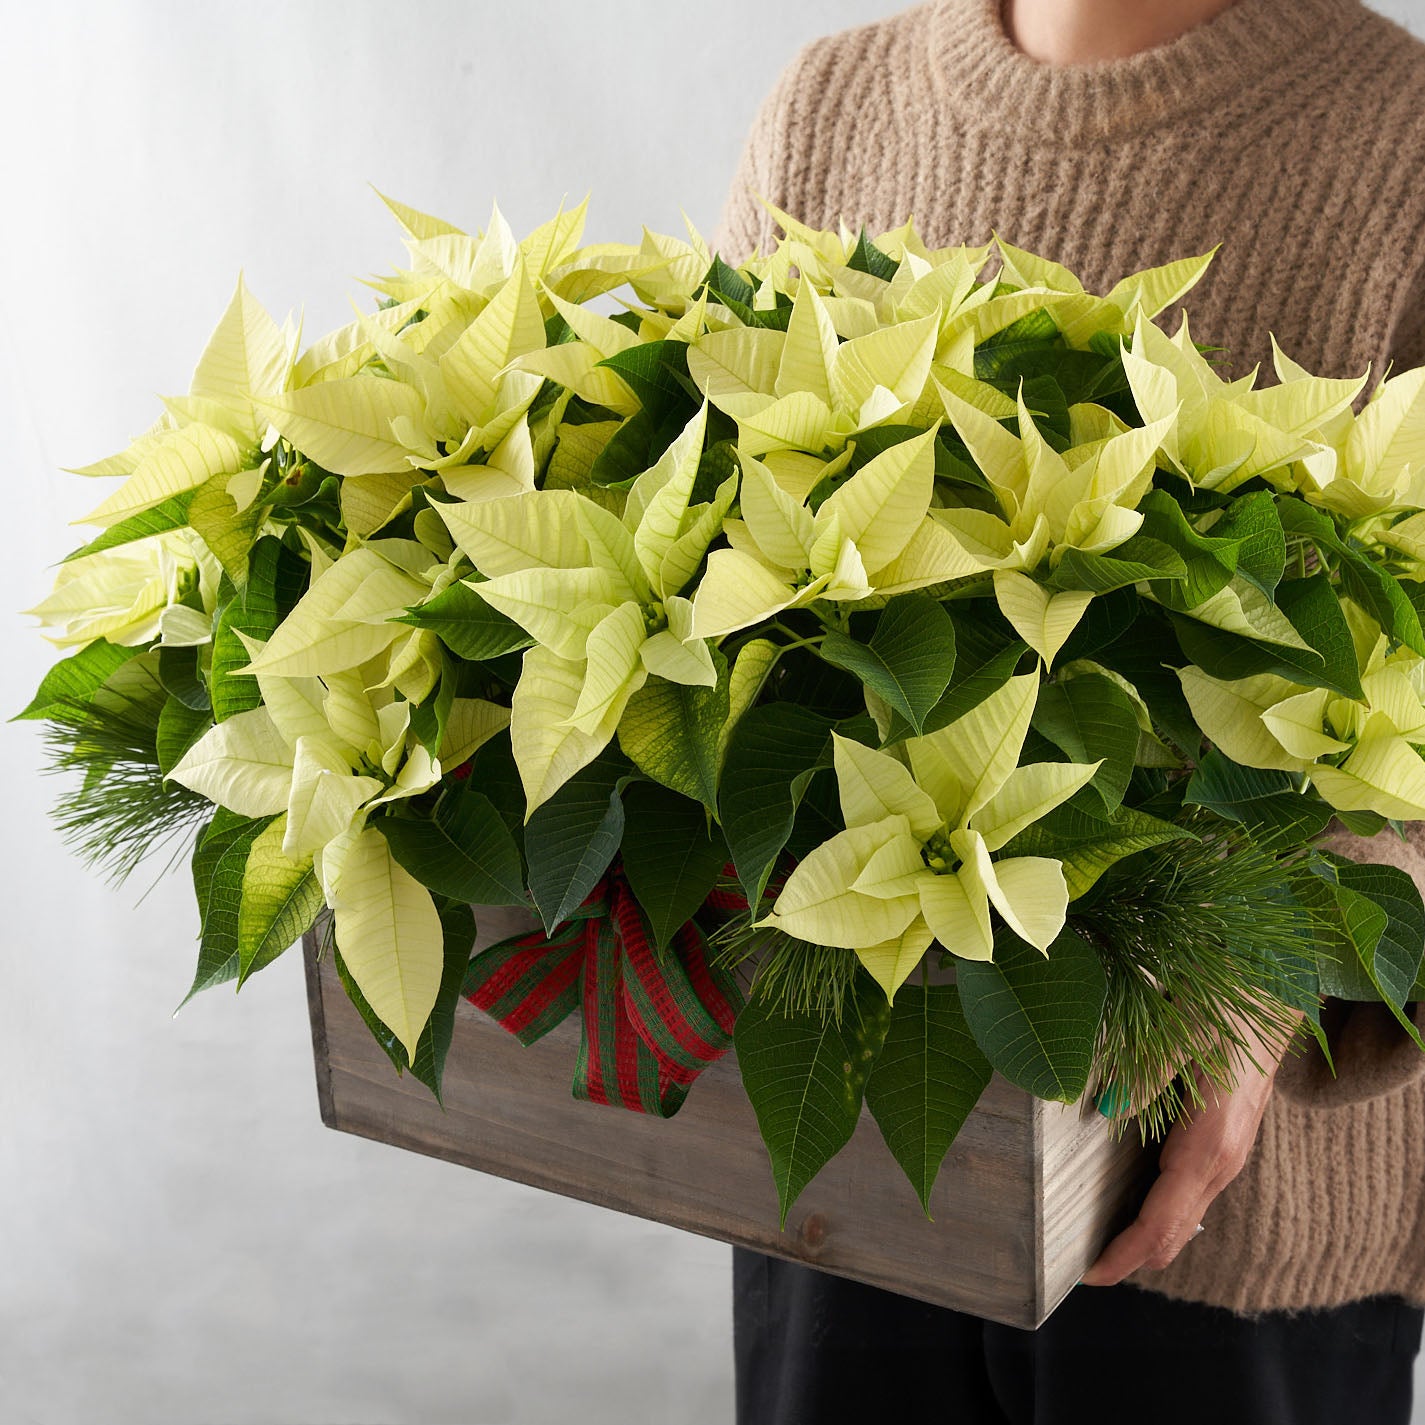 Person holding white poinsettia in a wooden box with pine boughs and a red and green bow.